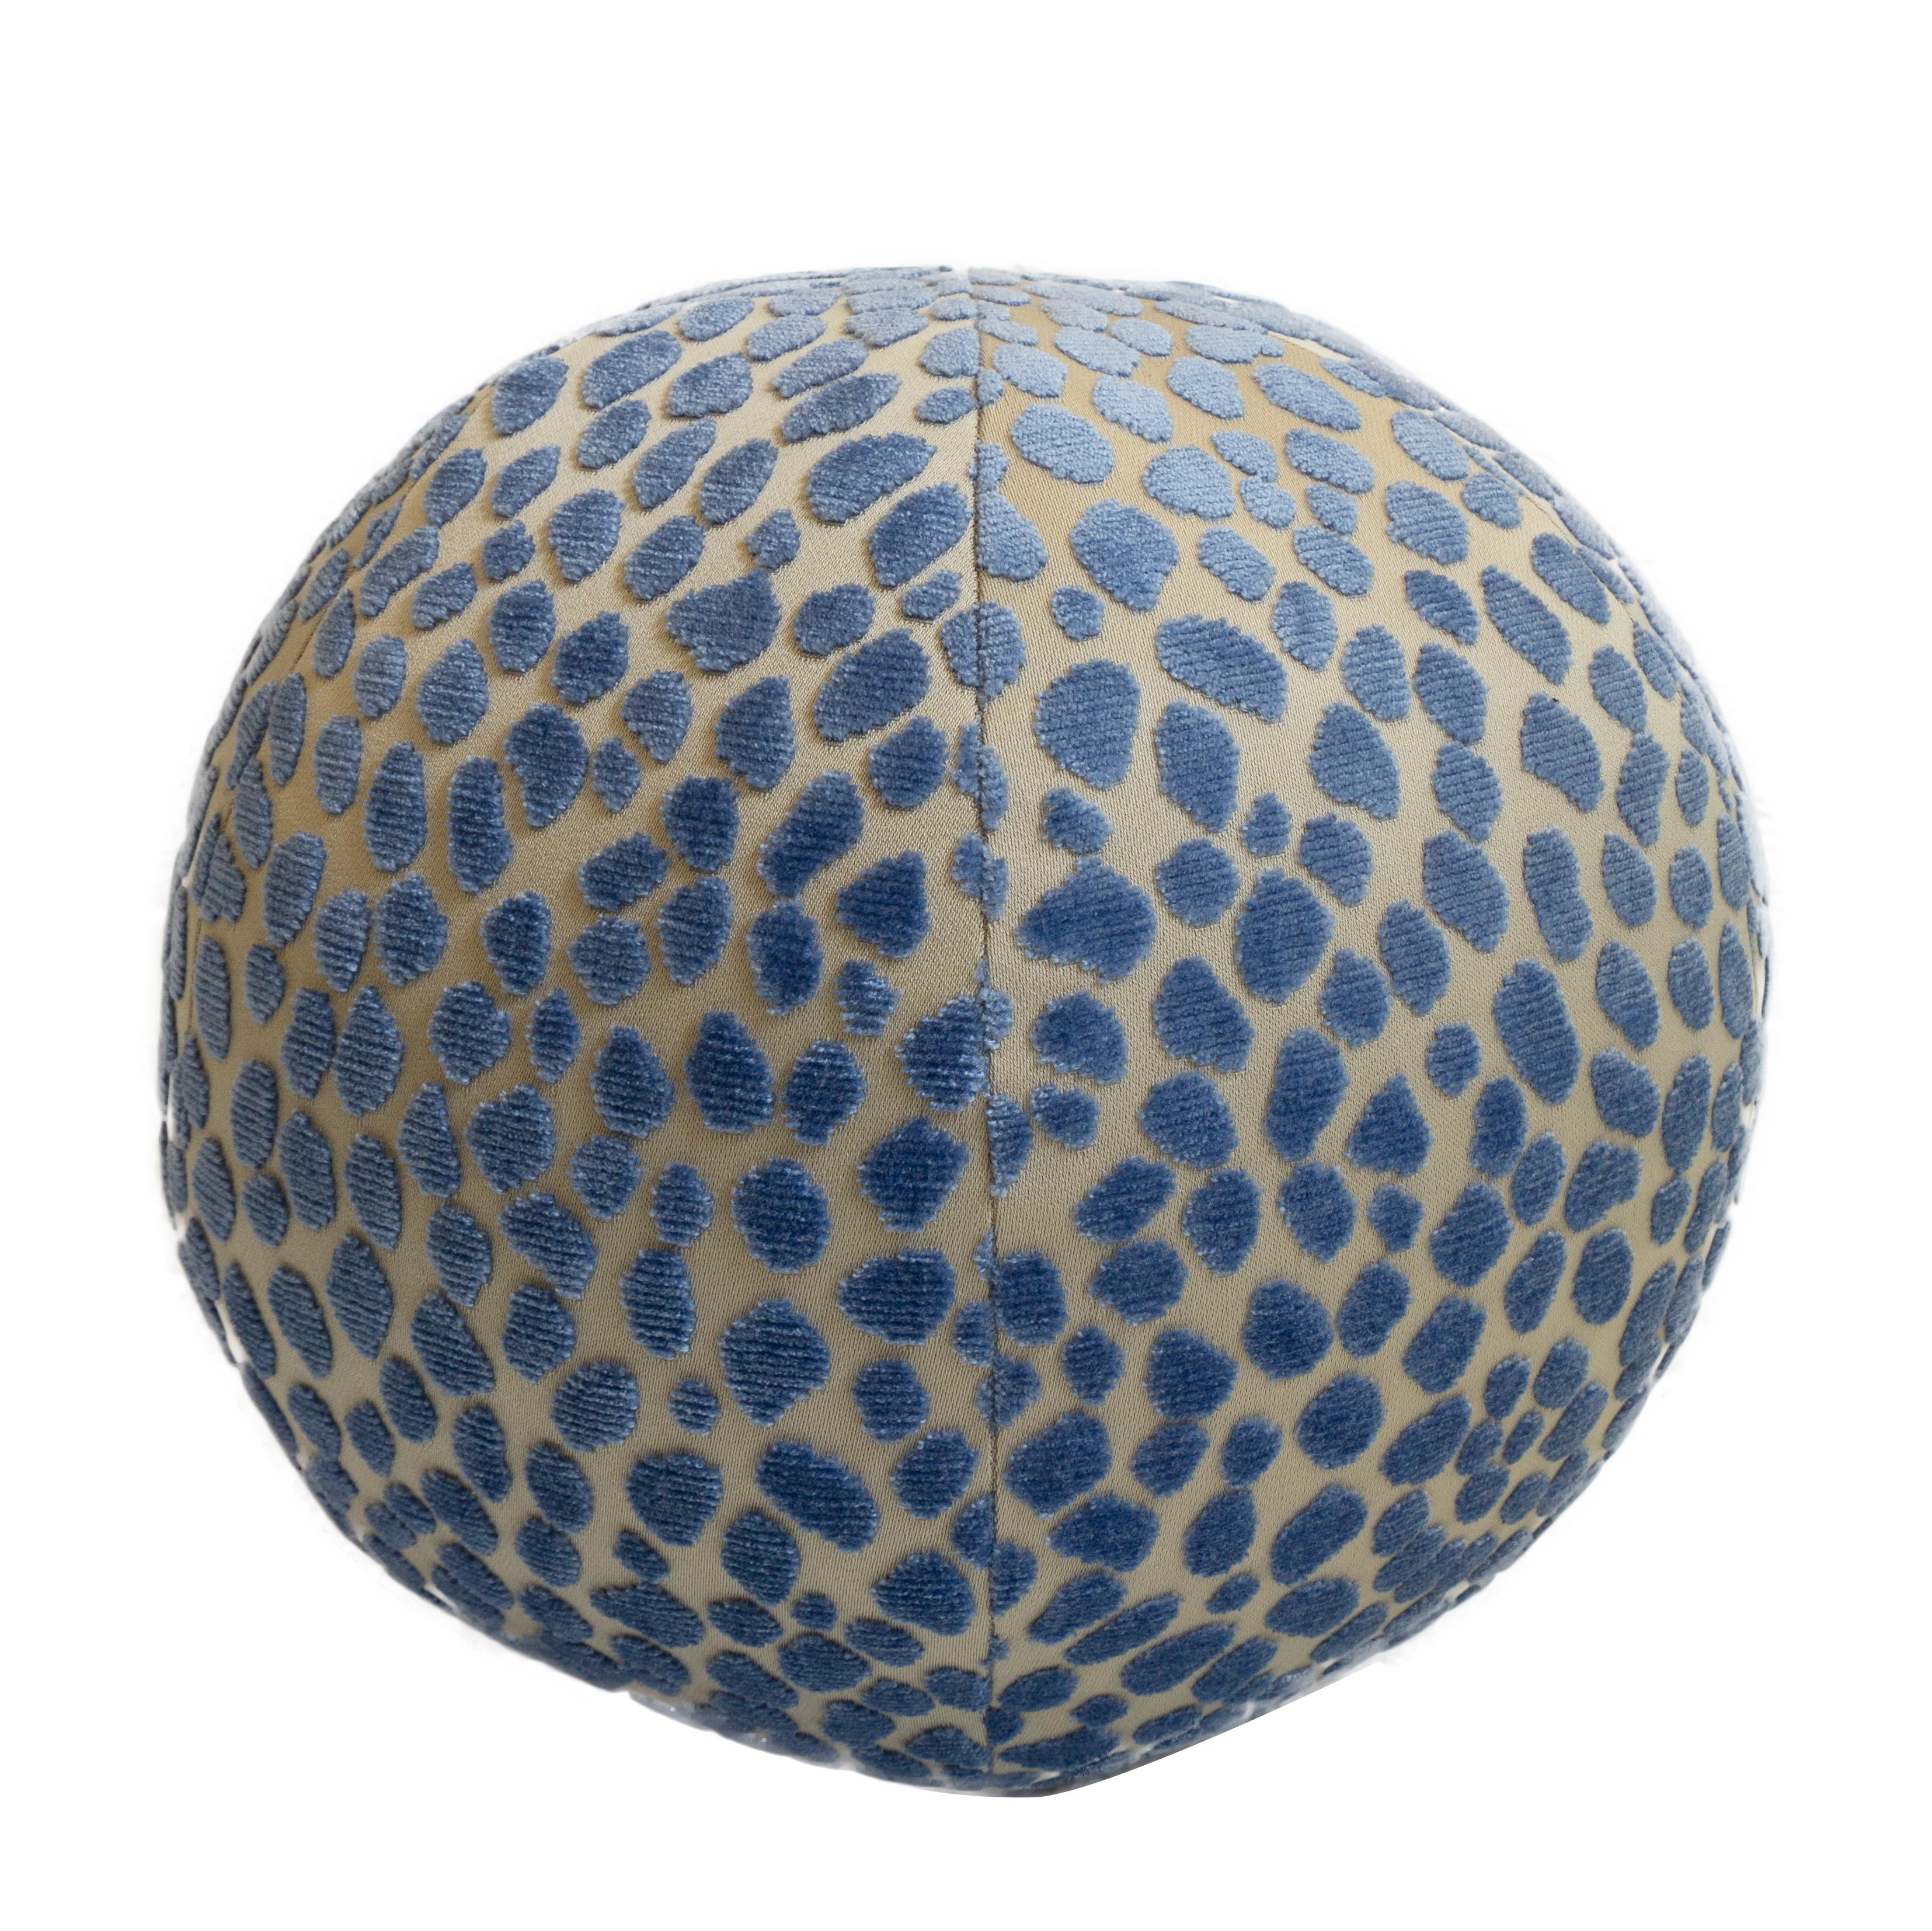 American Round Ball Pillow with Blue Velvet Dots